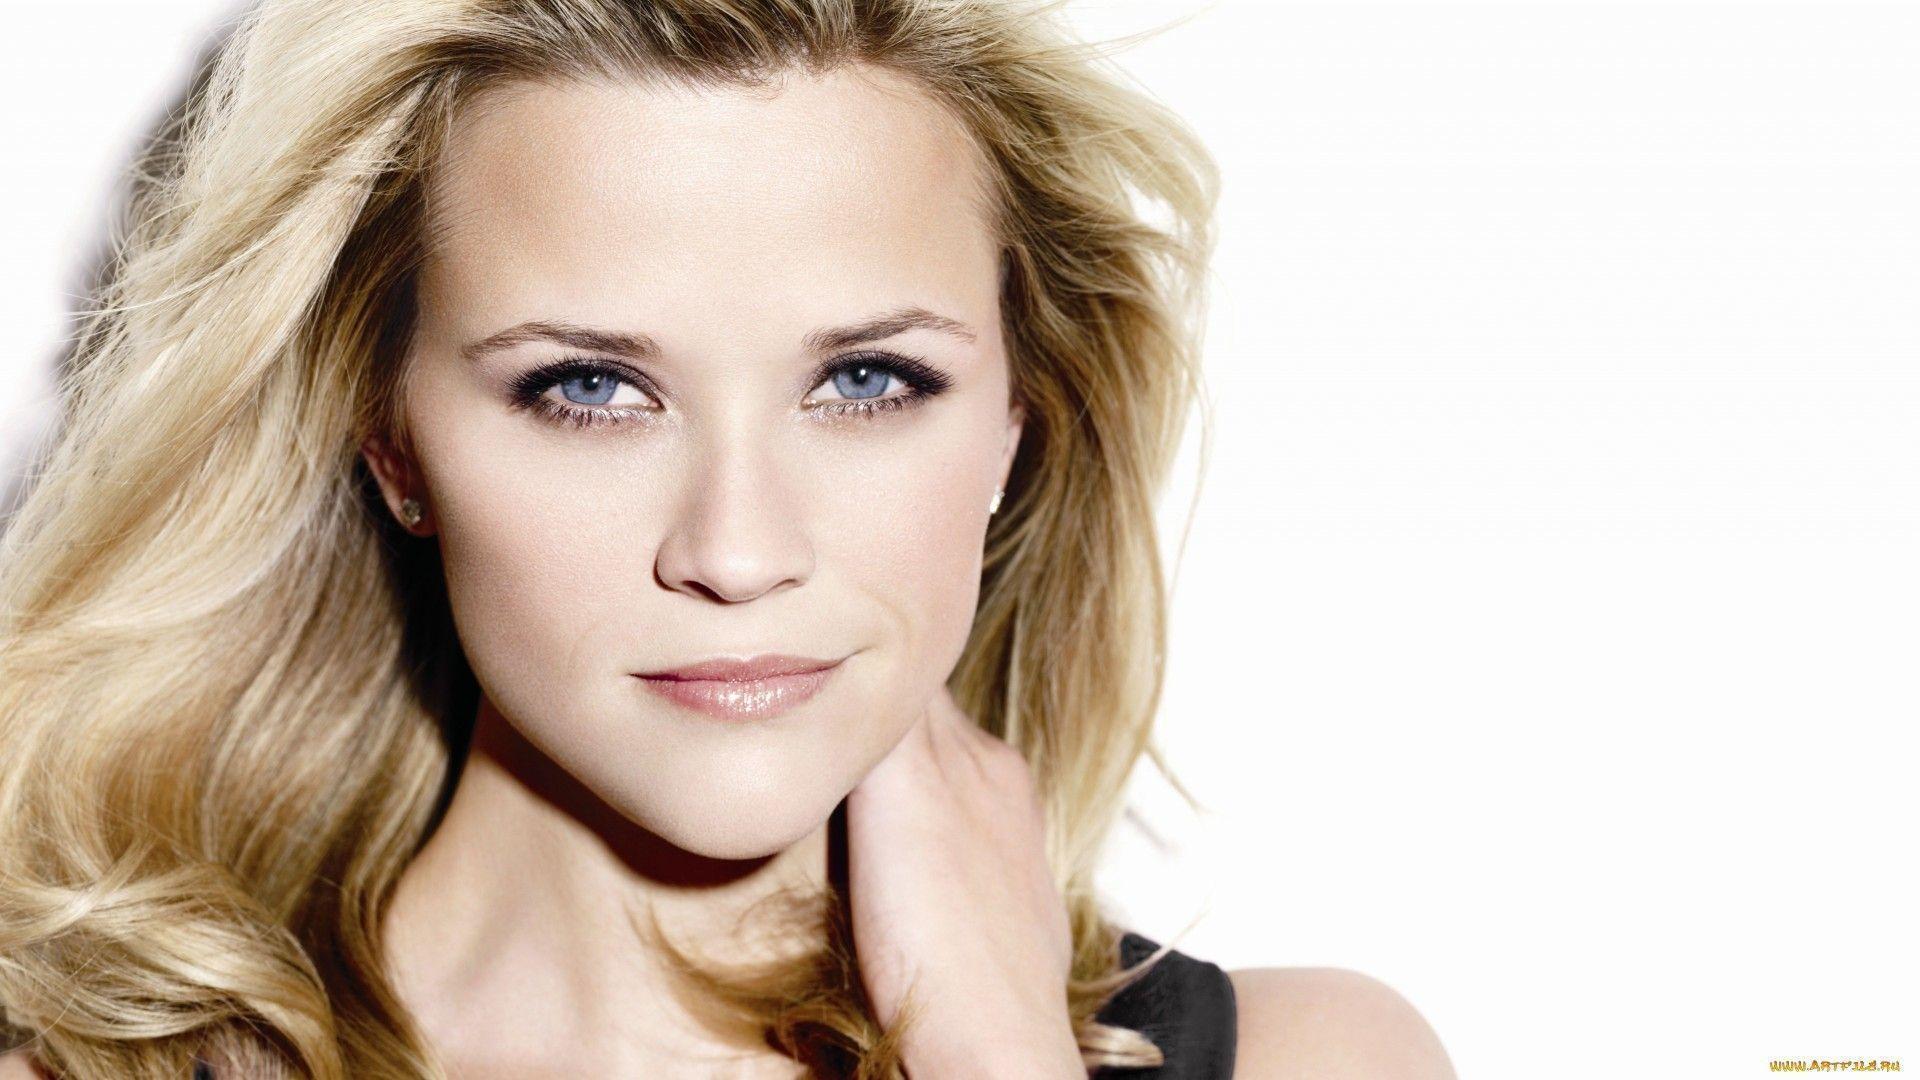 YOR17: Reese Witherspoon Wallpaper, Reese Witherspoon Pics